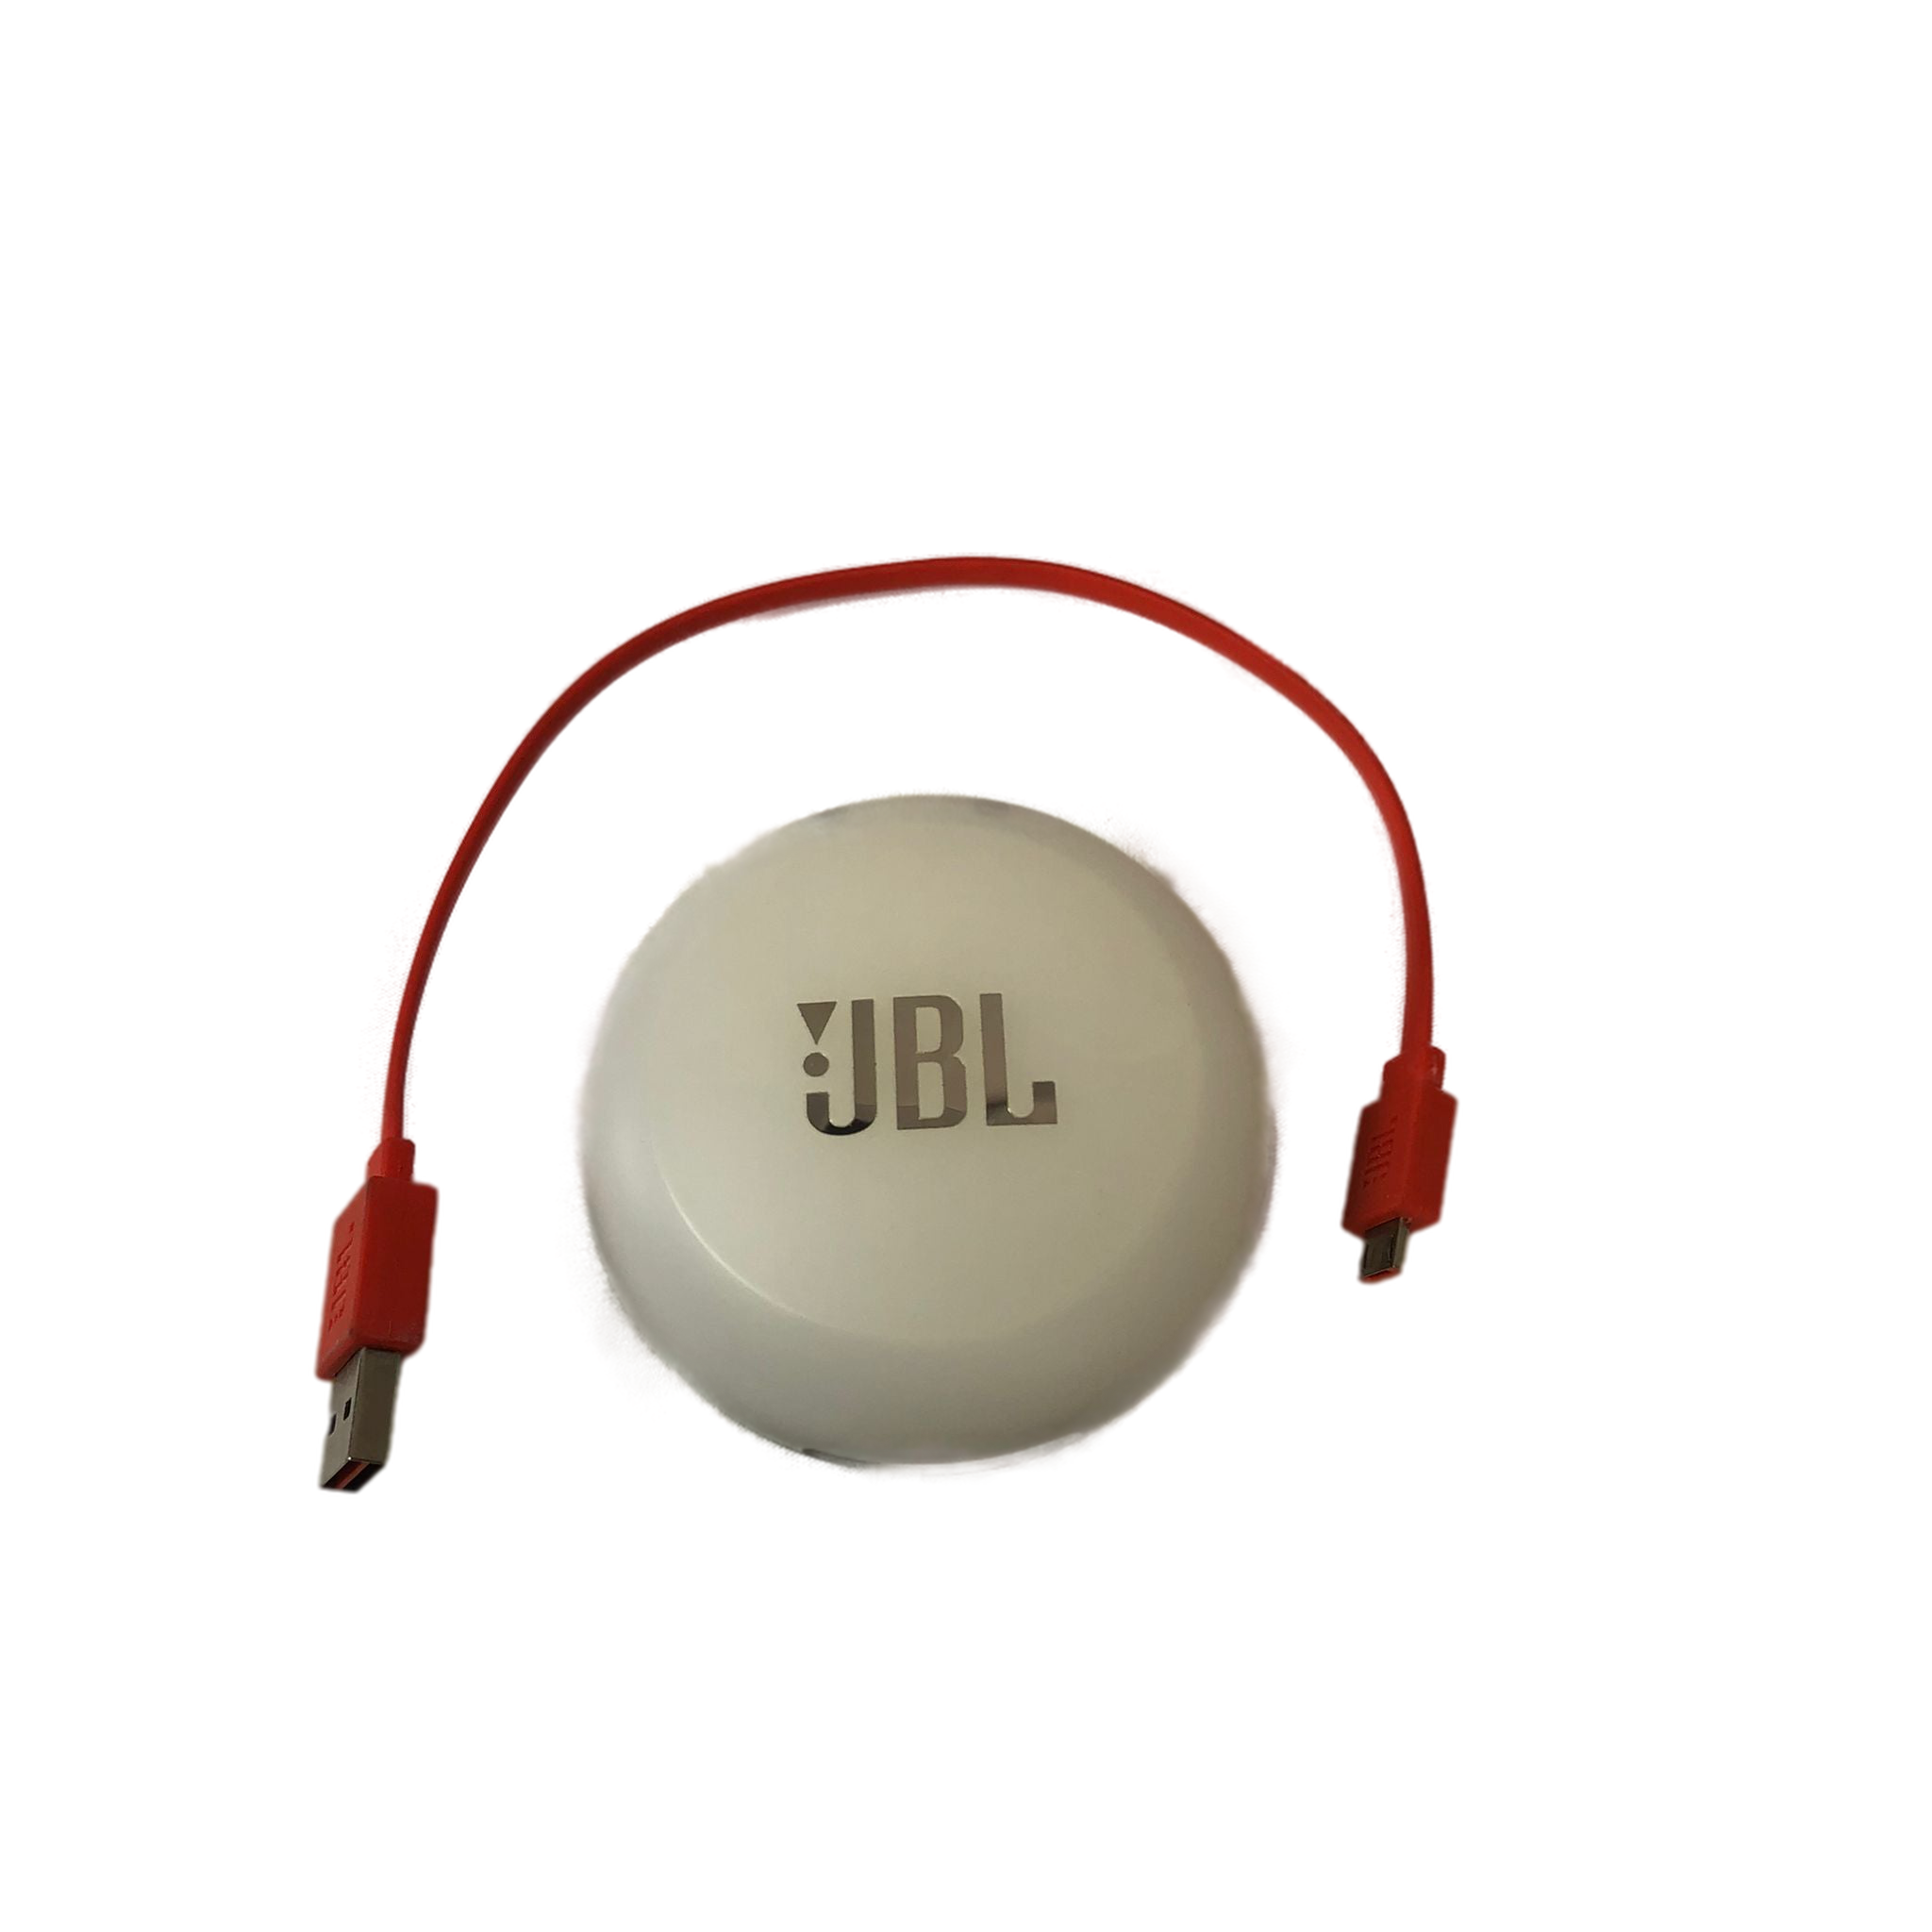 White JBL Charging case and charging cord